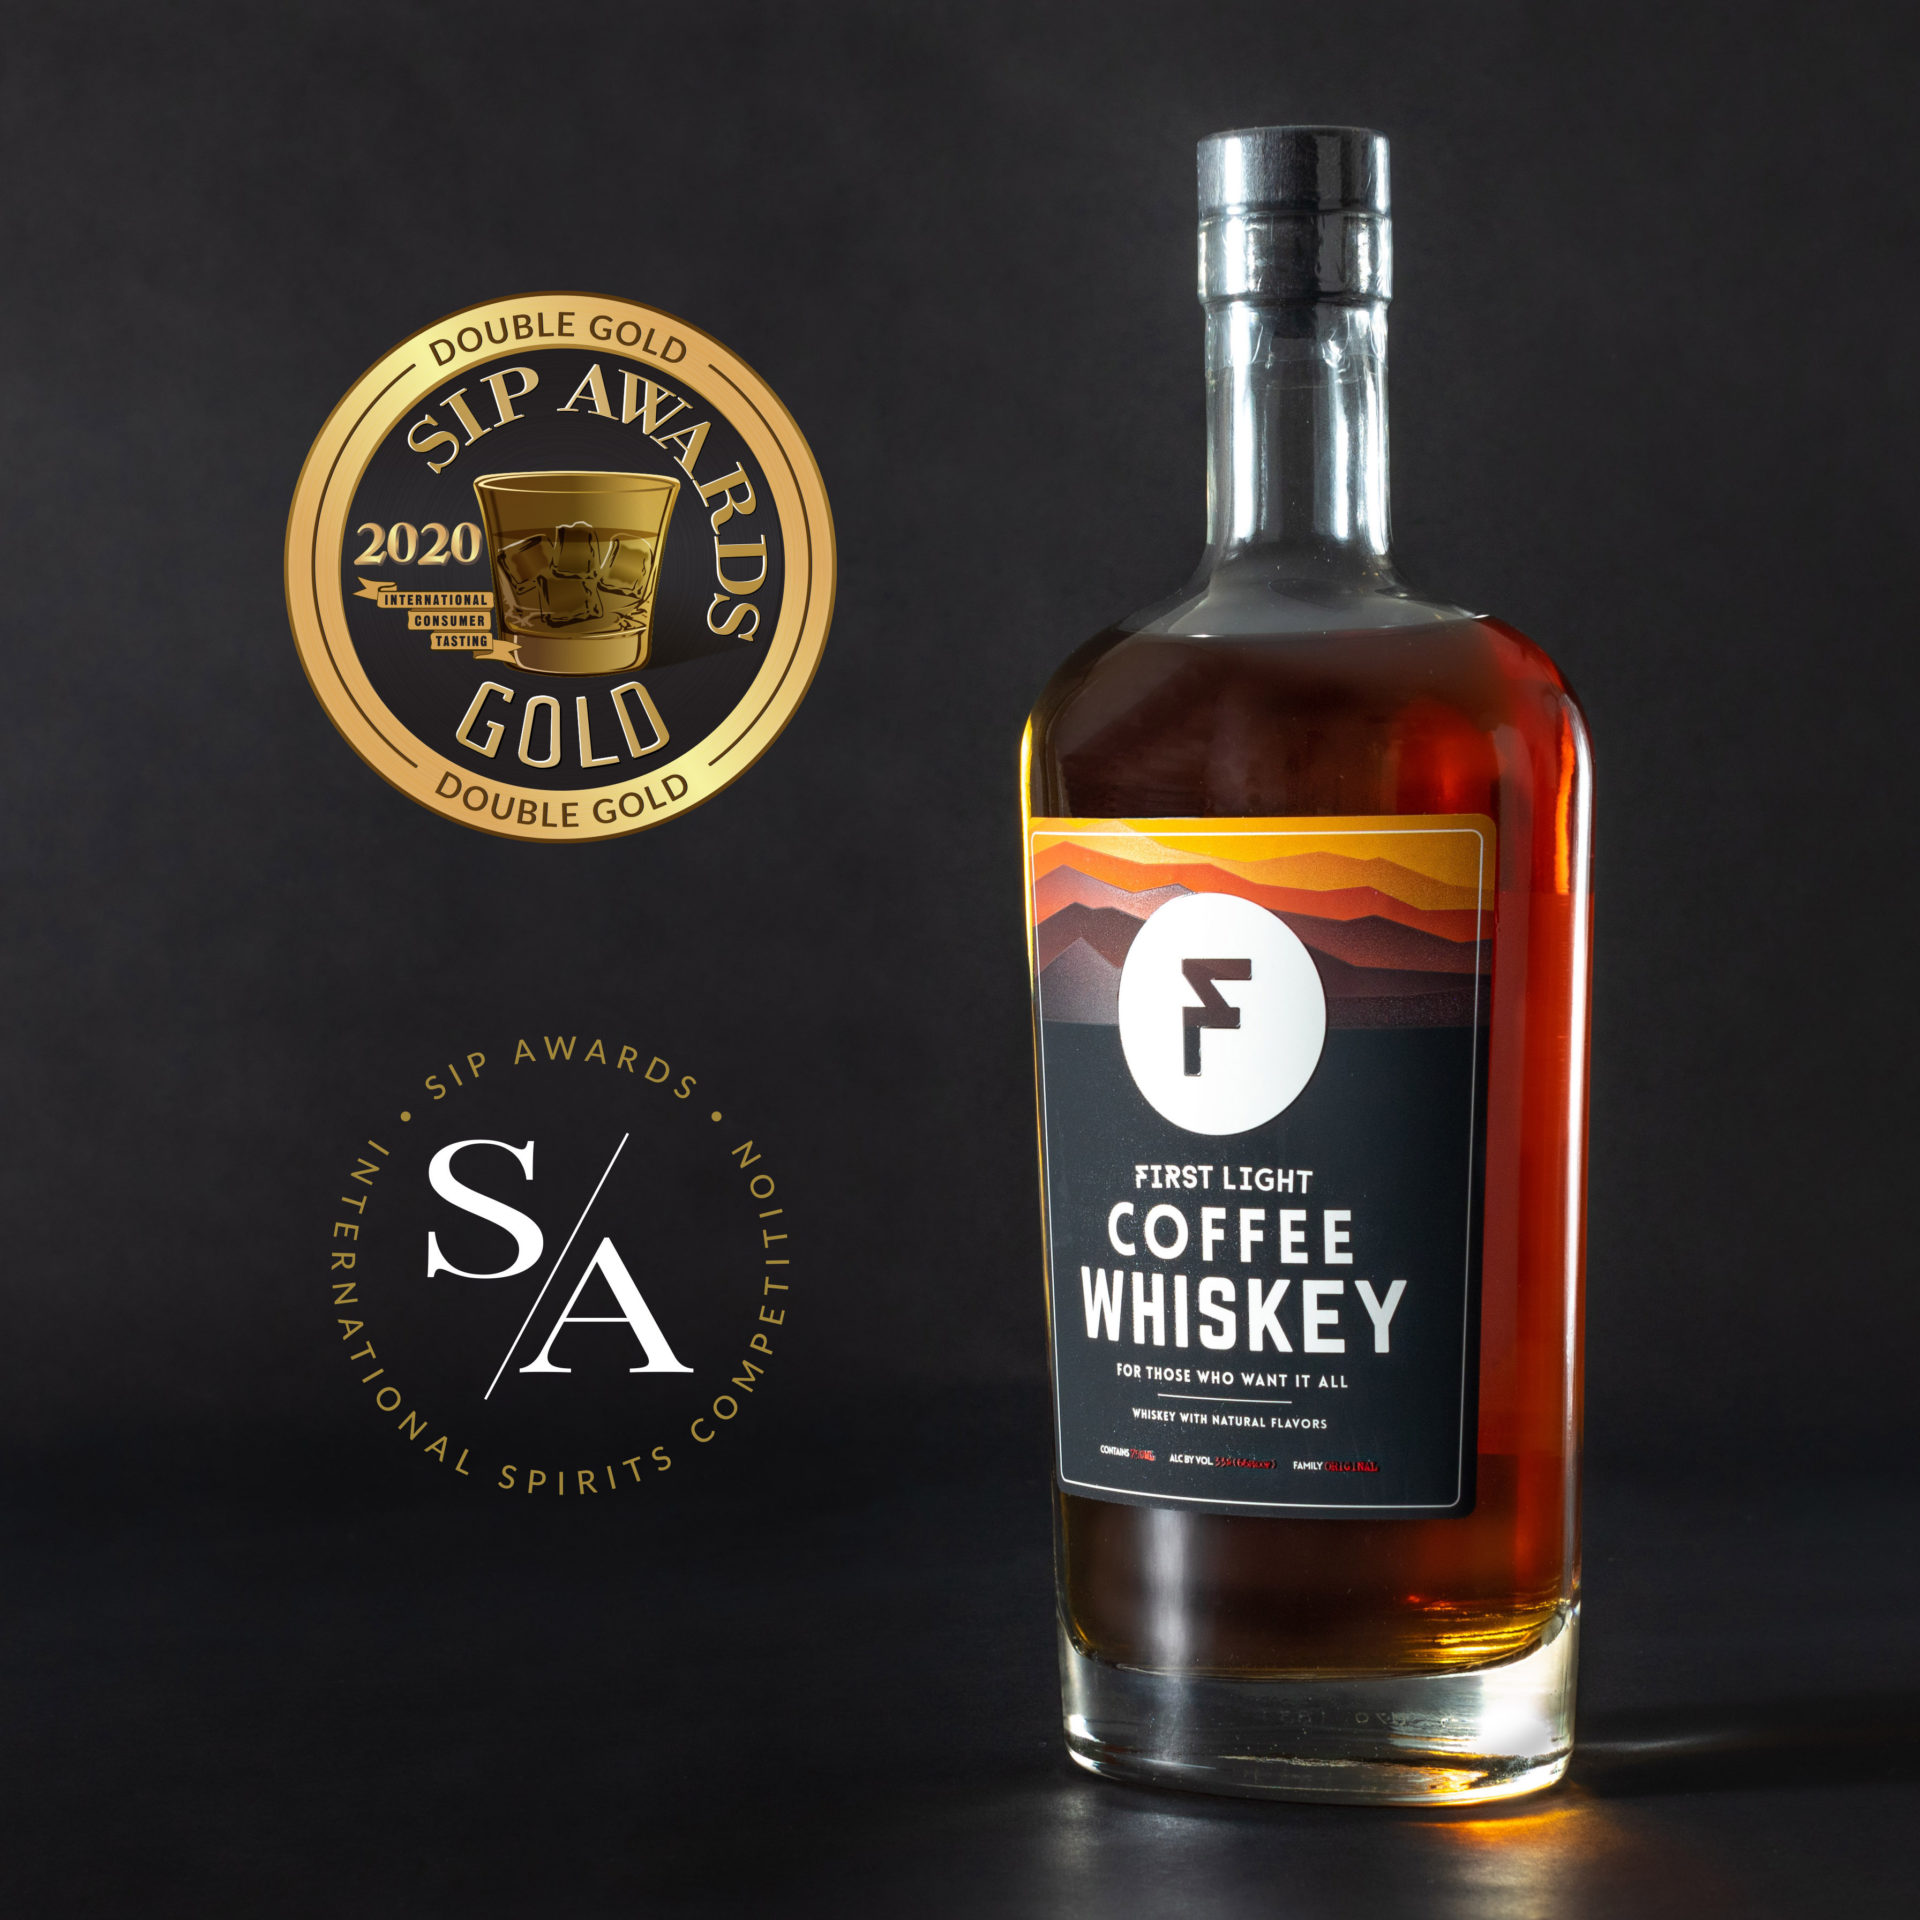 First Light Coffee Whiskey Combines Two Iconic Flavors for an ...